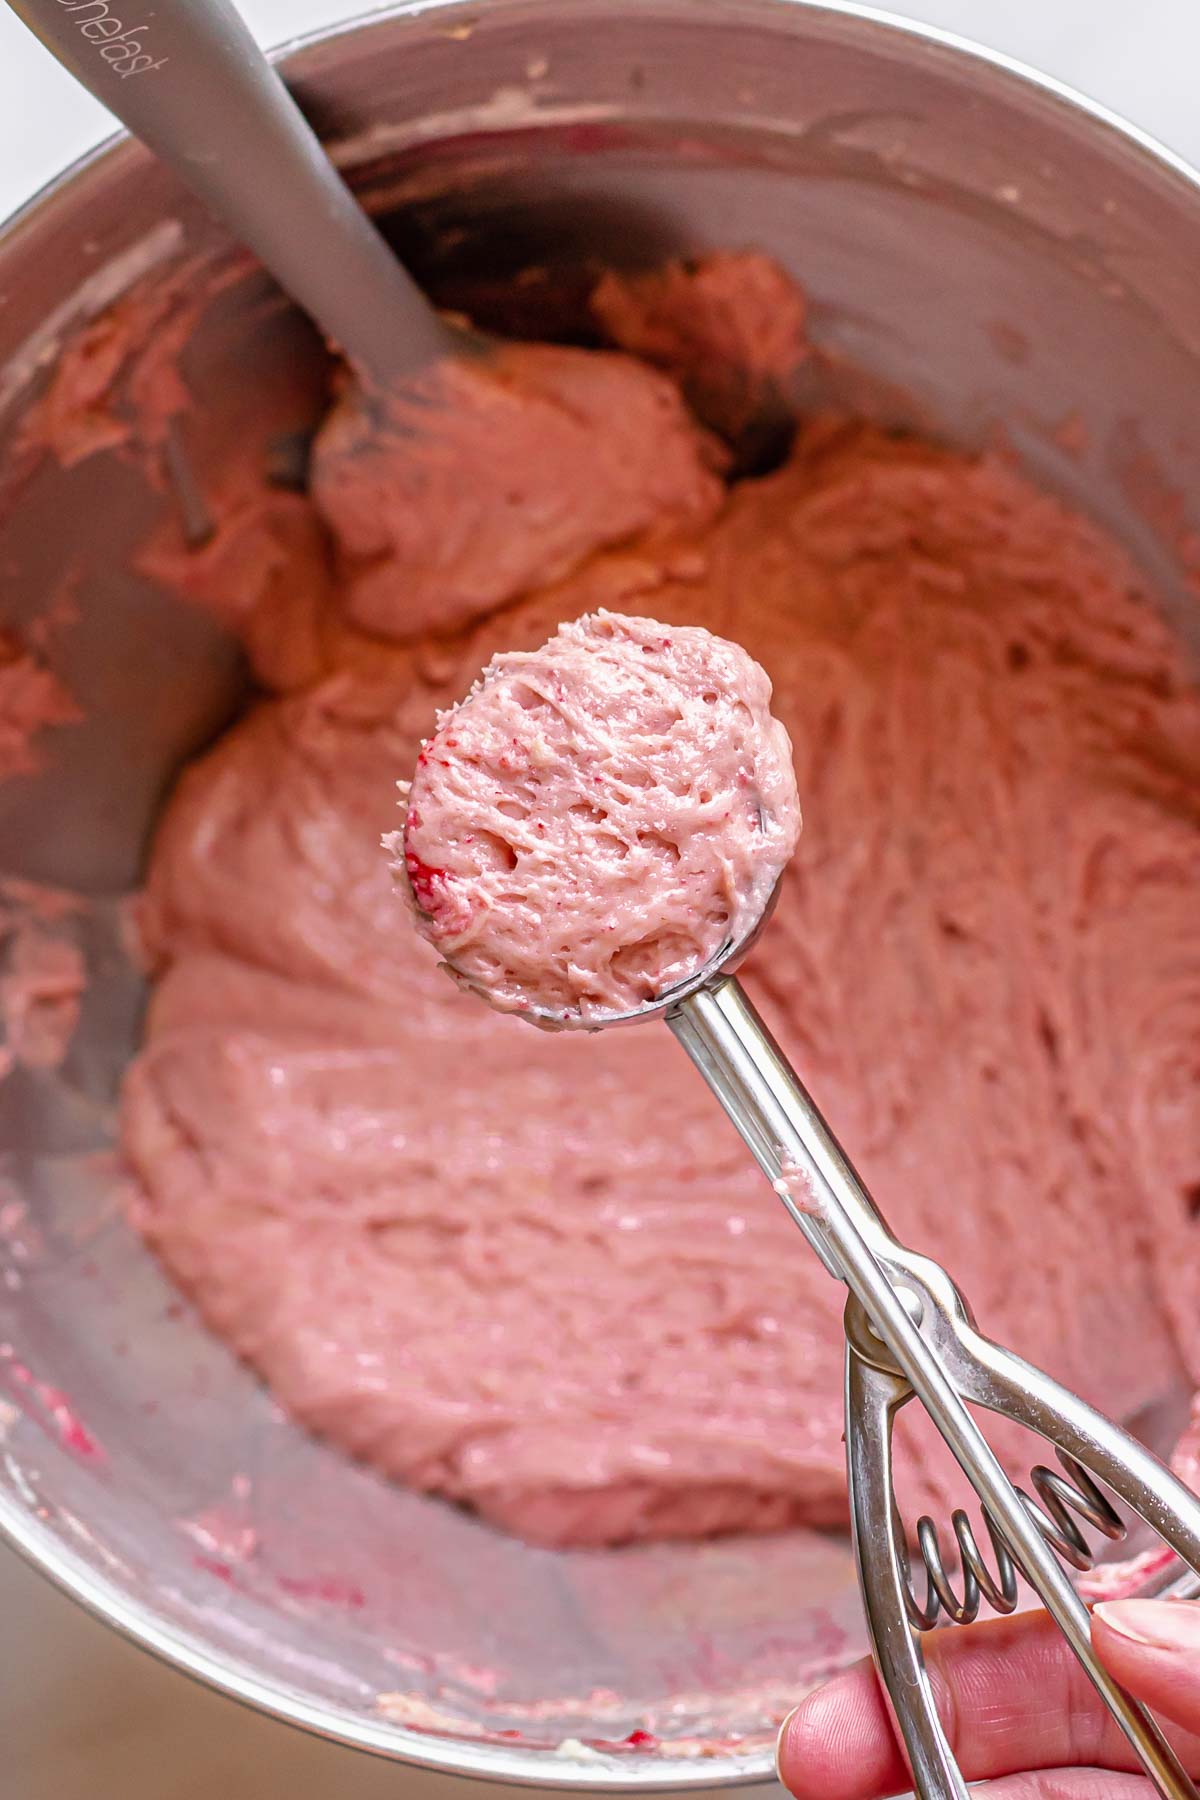 A scoop of strawberry cake batter in a cookie scoop.